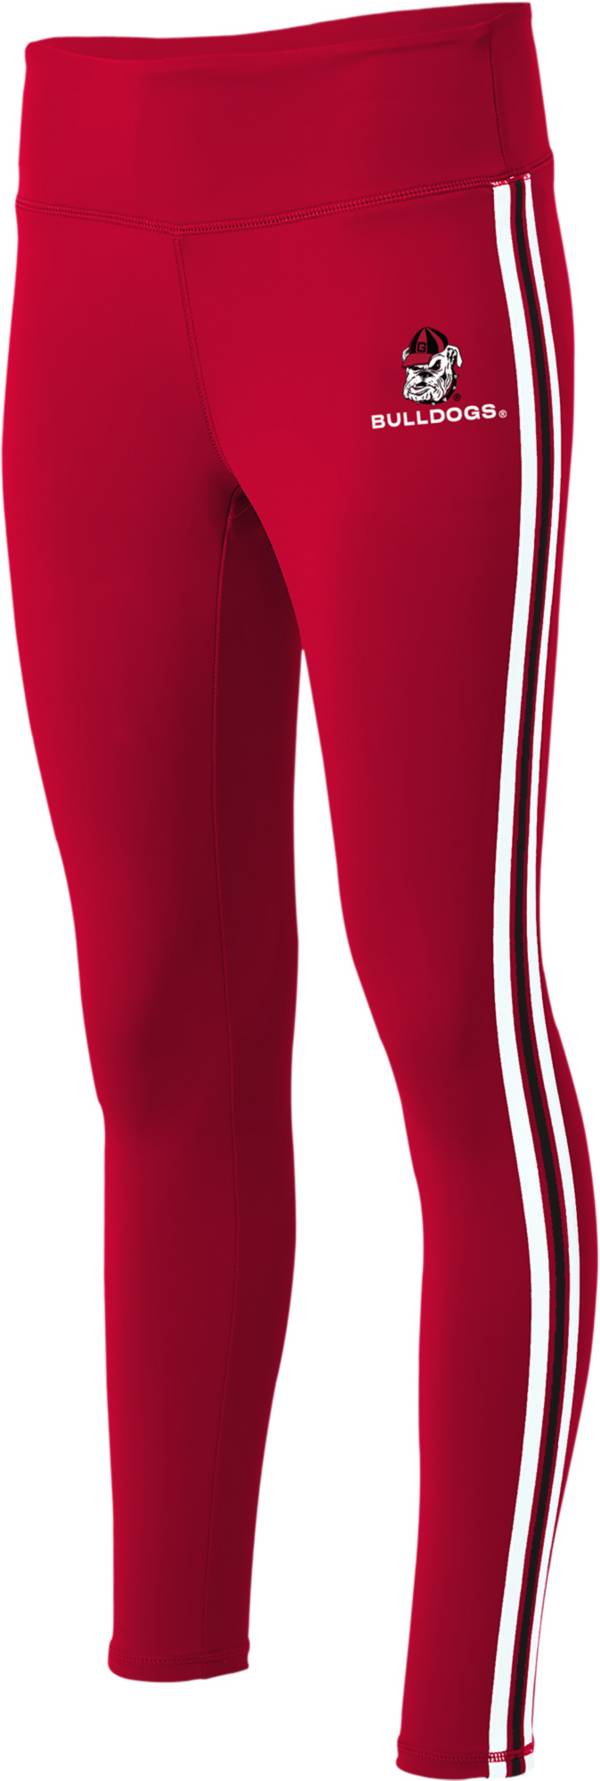 WEAR by Erin Andrews Women's Georgia Bulldogs  Red Striped Team Leggings product image